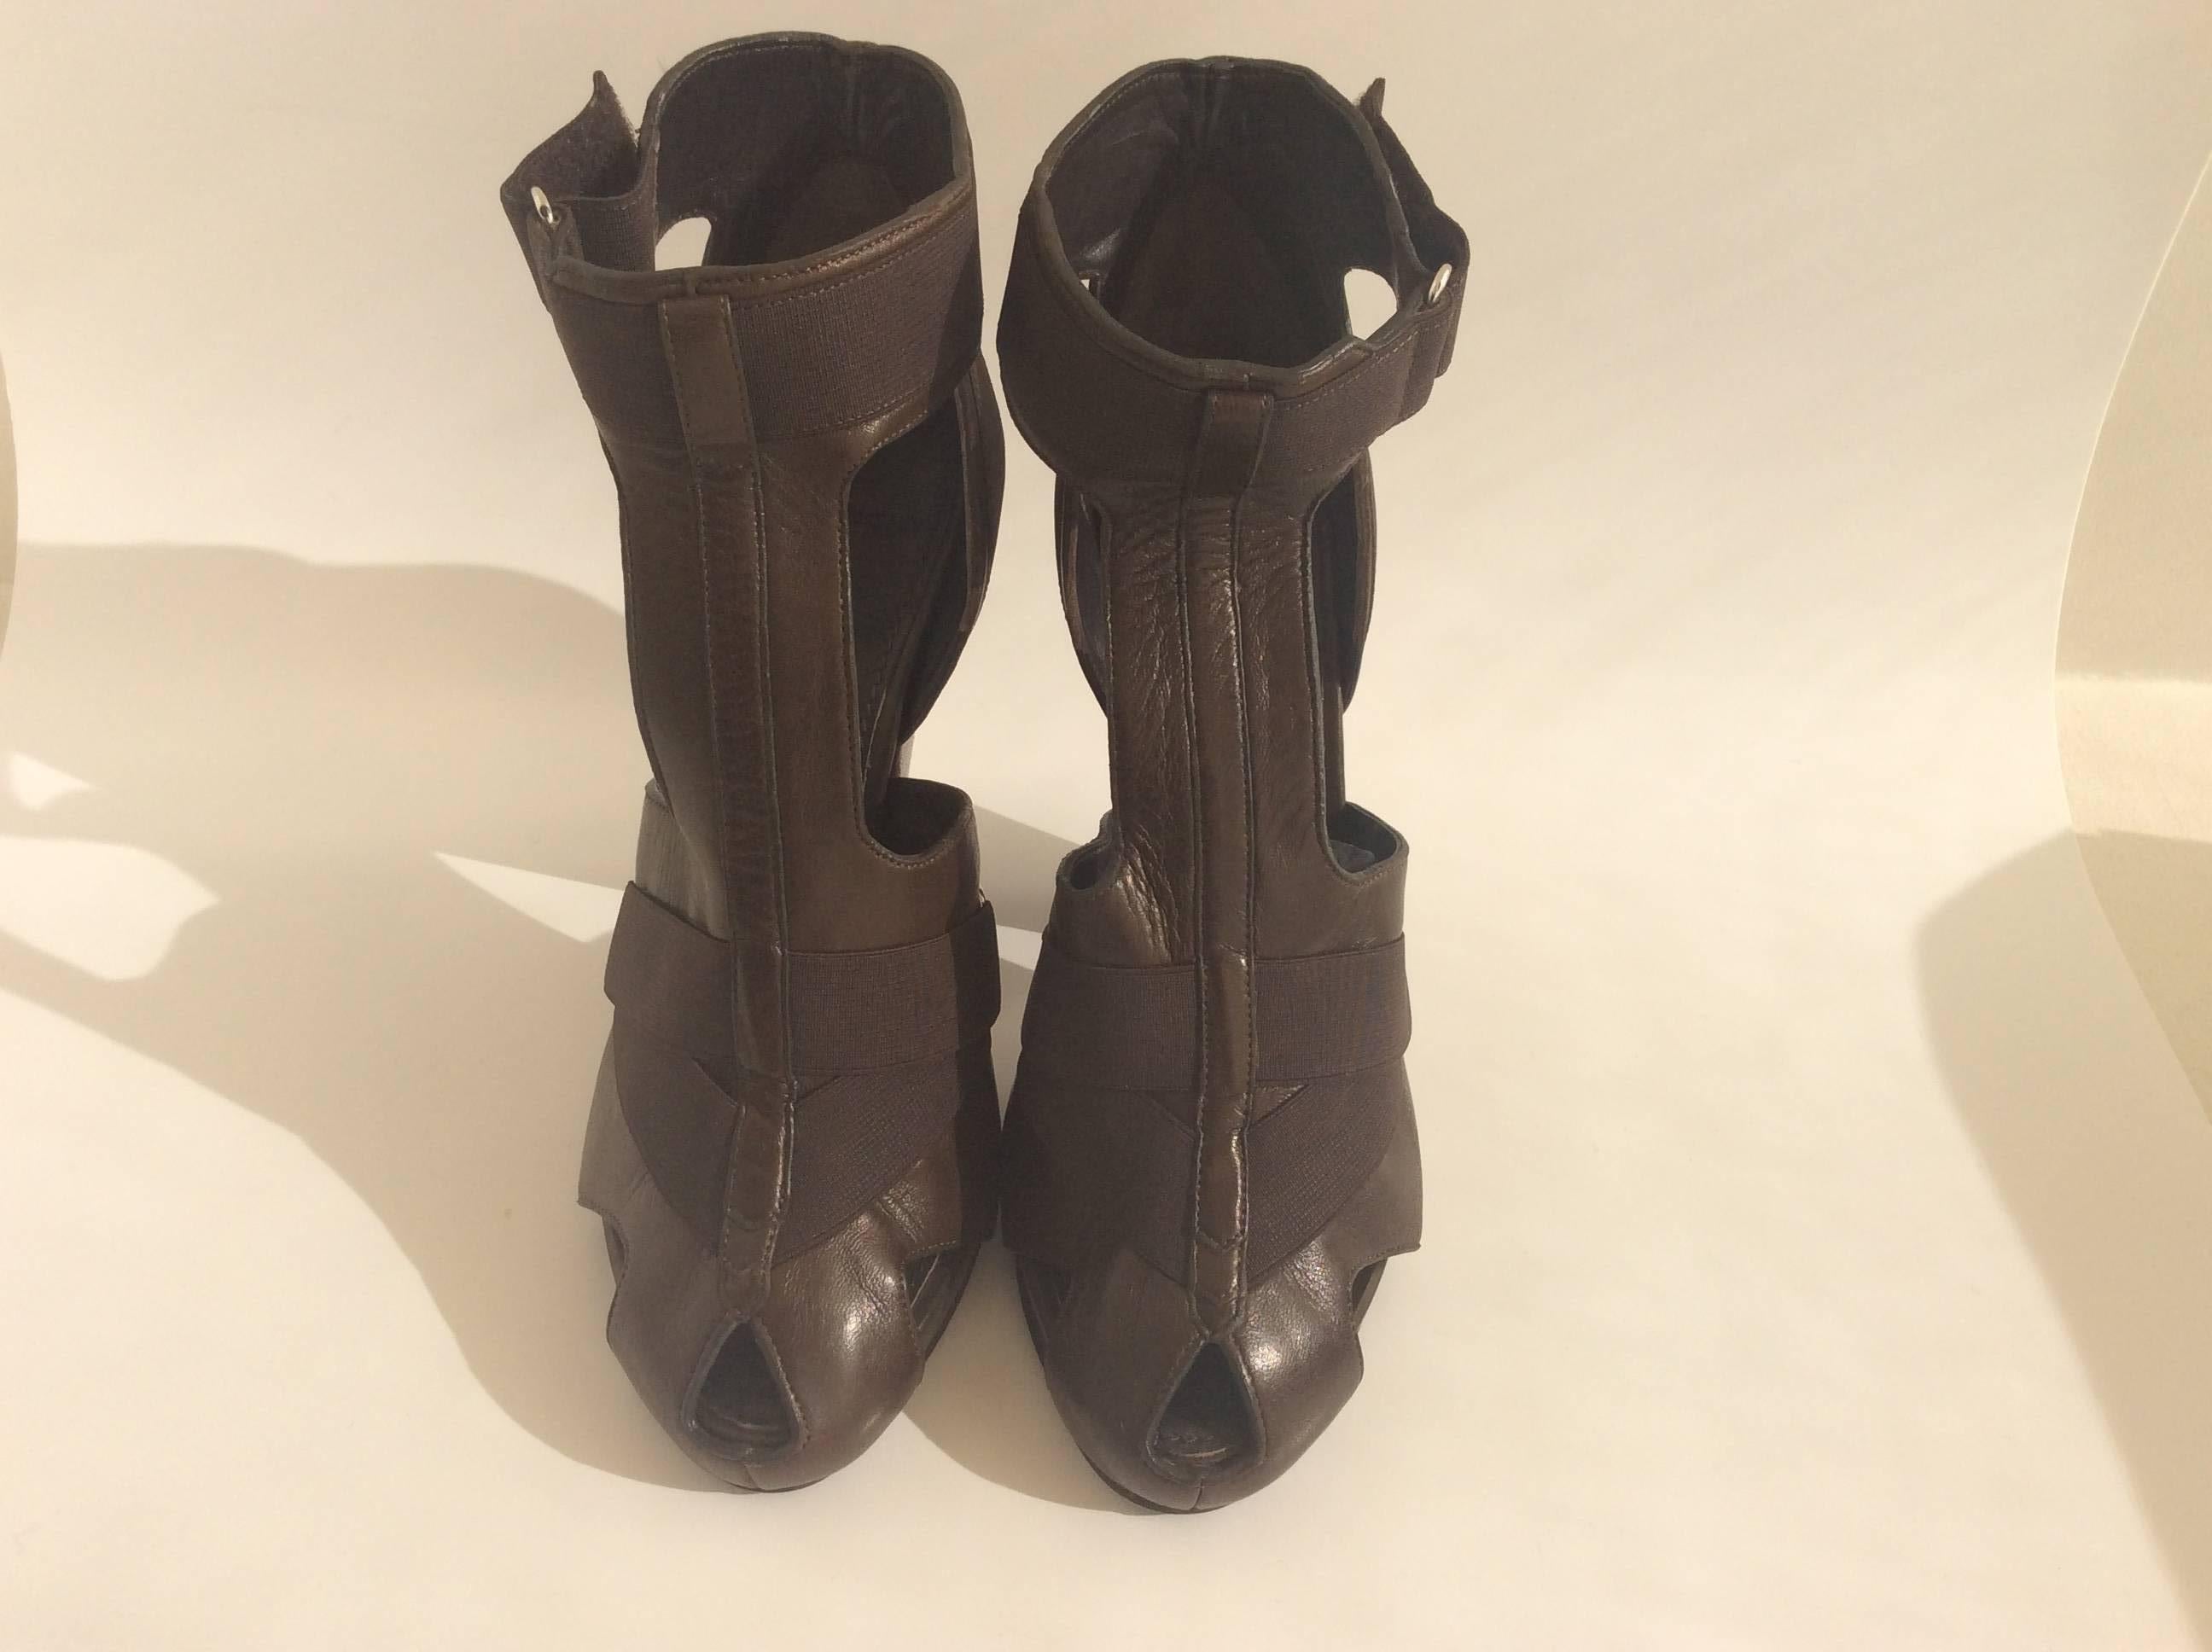 These Givenchy leather dark brown sandals will compliment any women's foot. With it's .5inch platform, 5inch heel and elastic straps these would be perfect for a night out on the town.